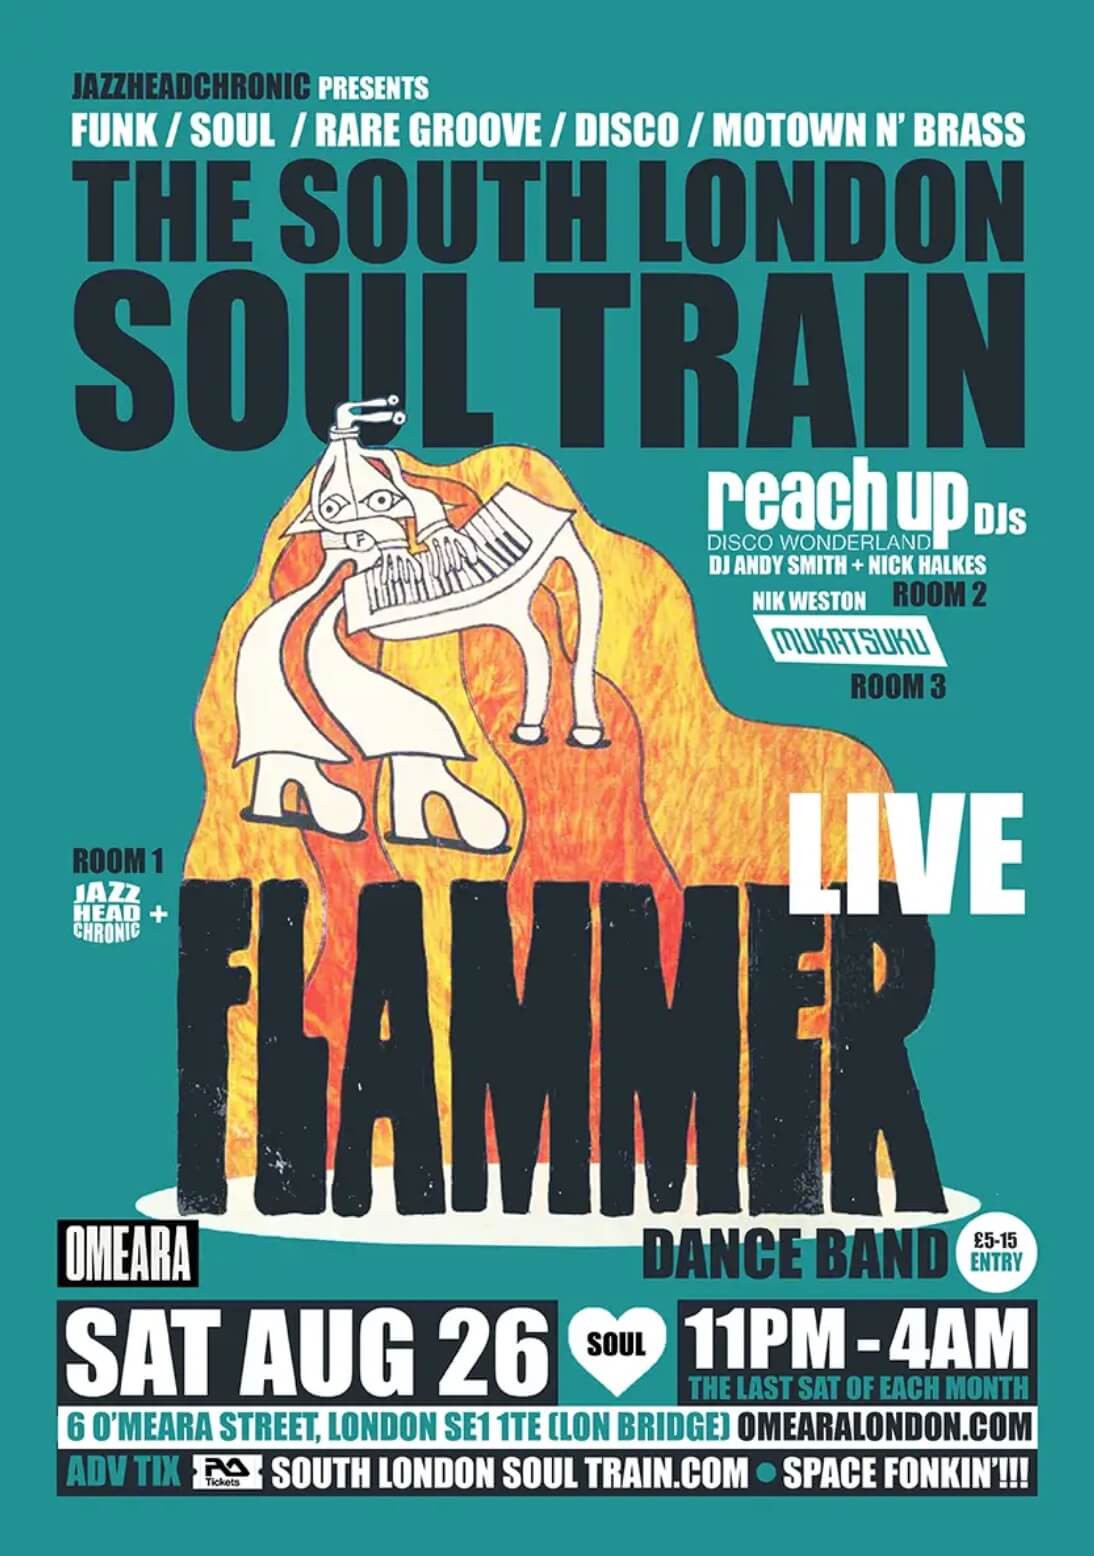 The South London Soul Train with Flammer Dance Band (Live)